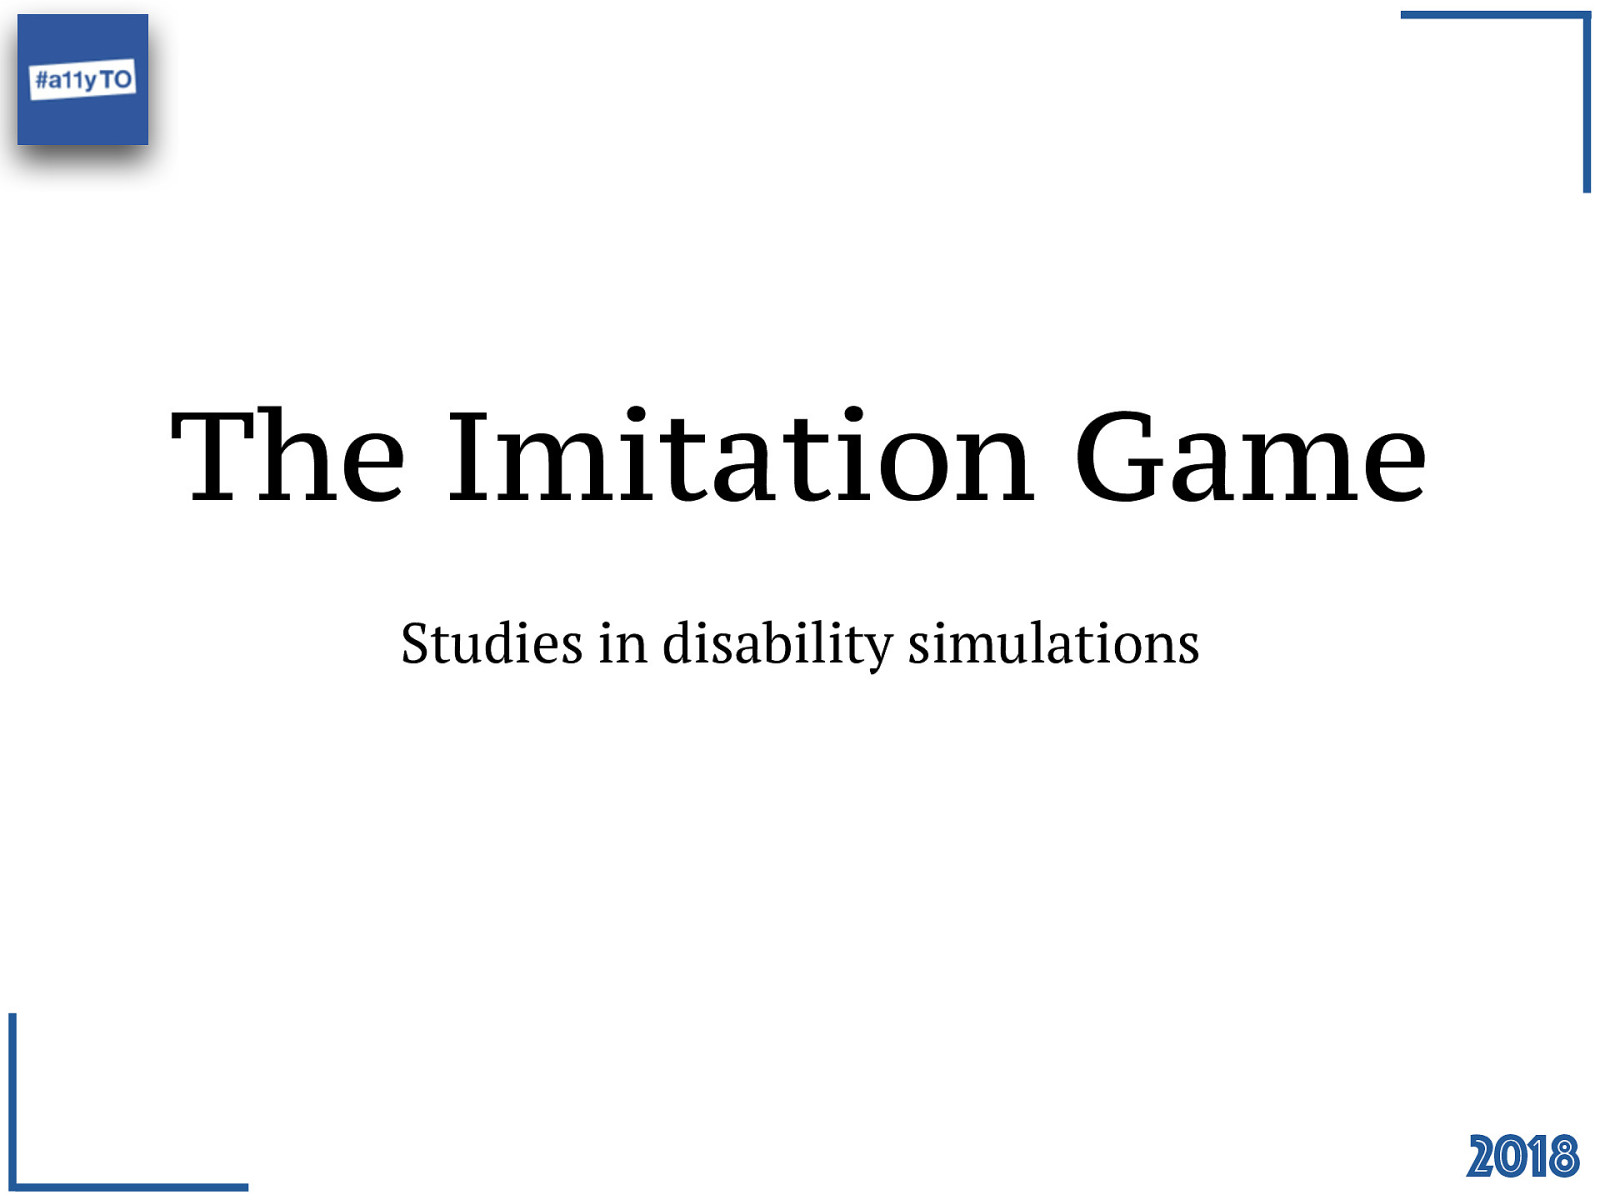 The Imitation Game - studies in disability simulations